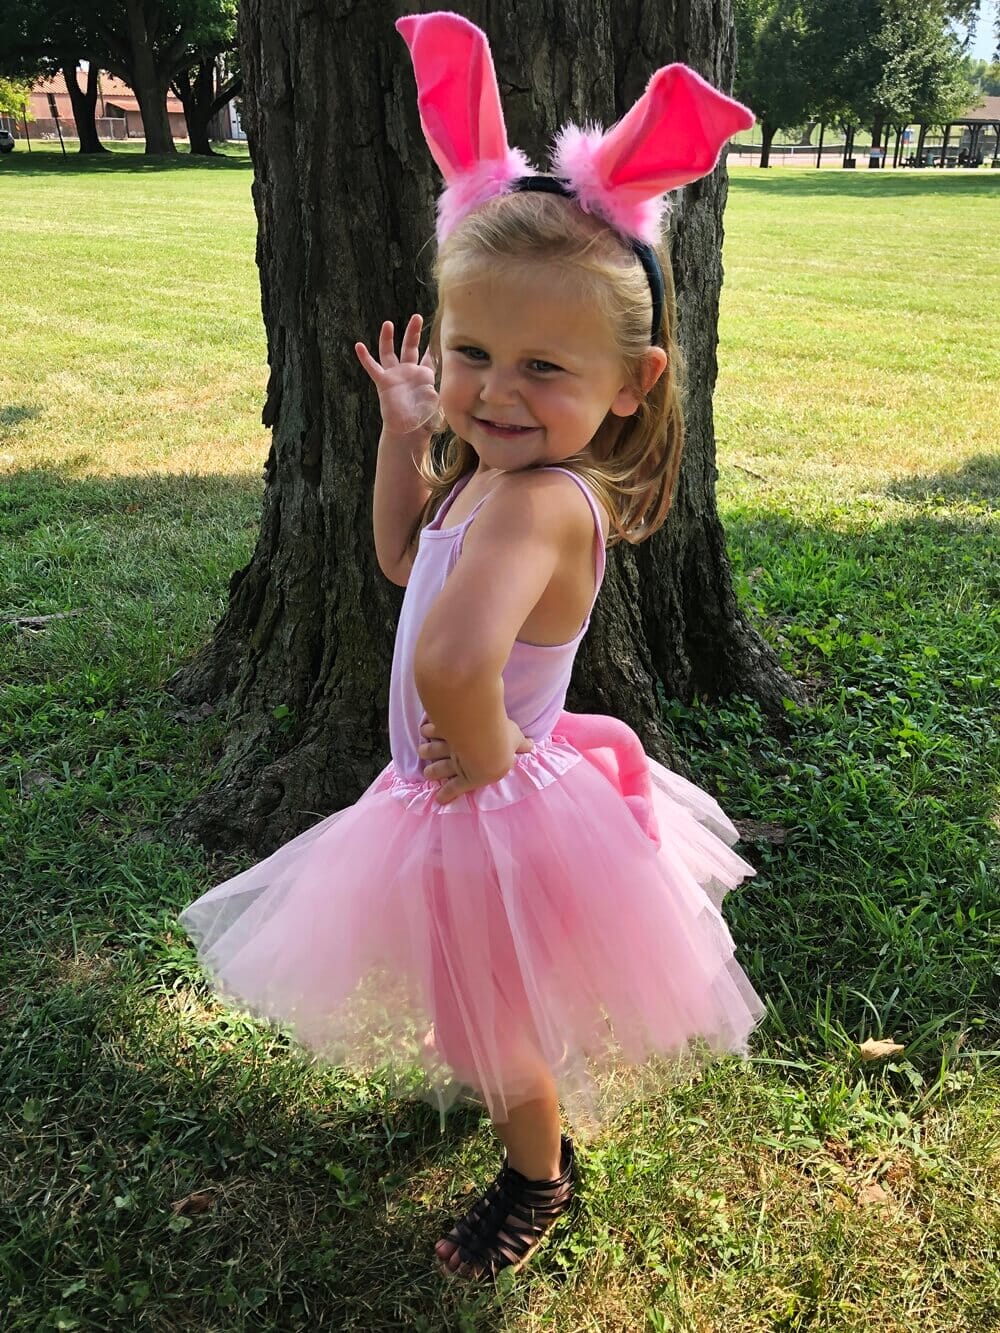 Girls Pink Pig Costume - Complete Kids Costume with Pink Tutu, Tail, & Ears - Sydney So Sweet